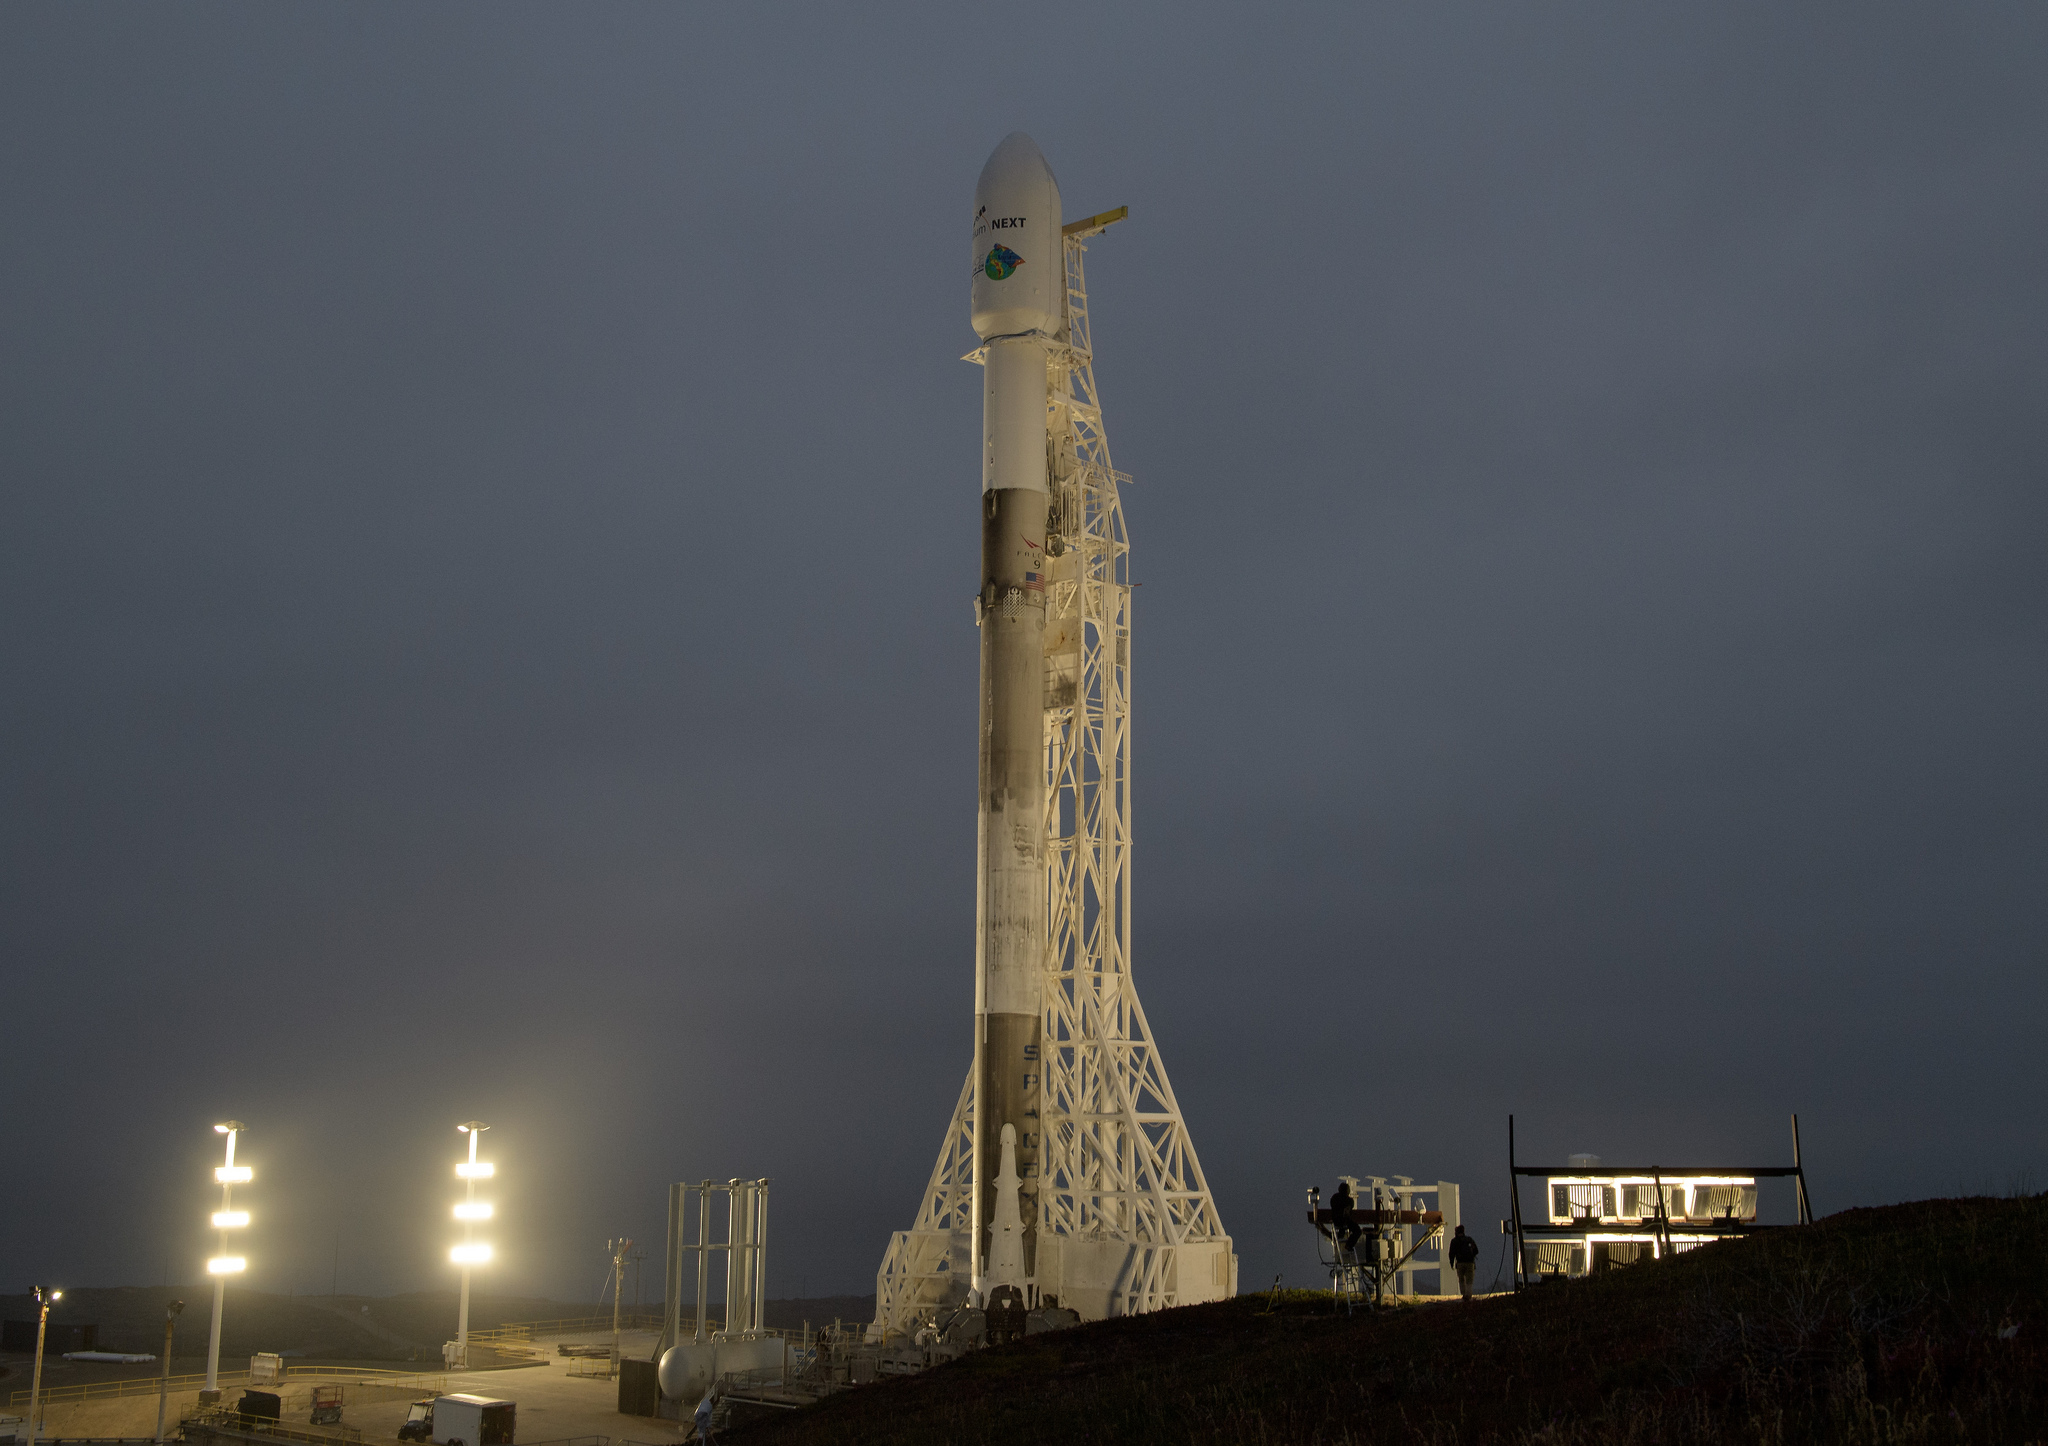 The SpaceX Falcon 9 that will carry GRACE-FO to orbit sits on the launchpad.